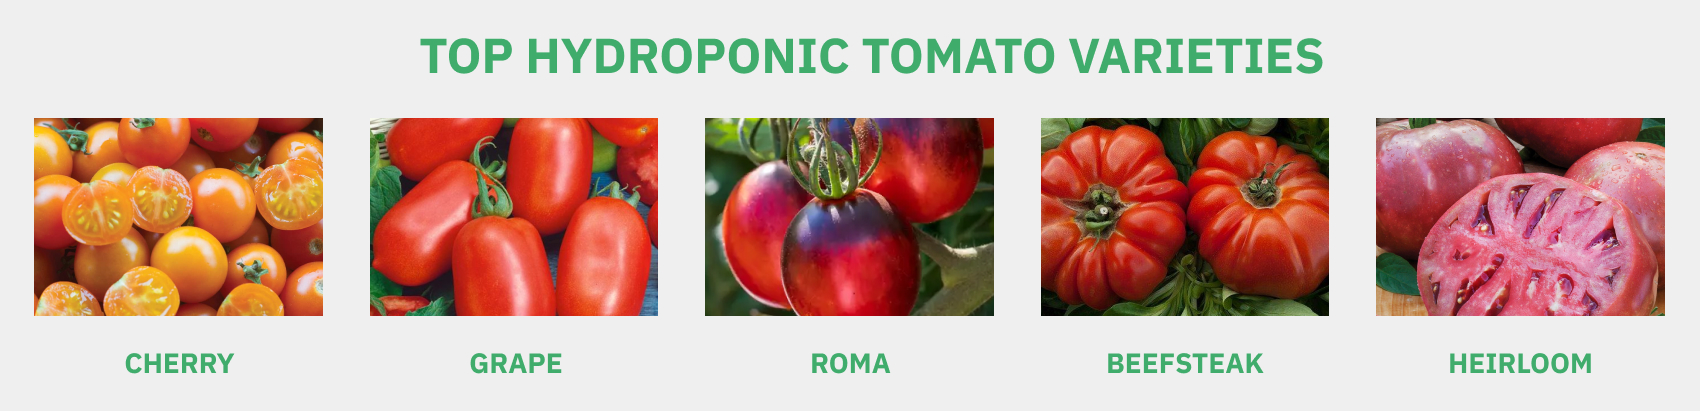 Here are some of the best tomato varieties for hydroponic systems.